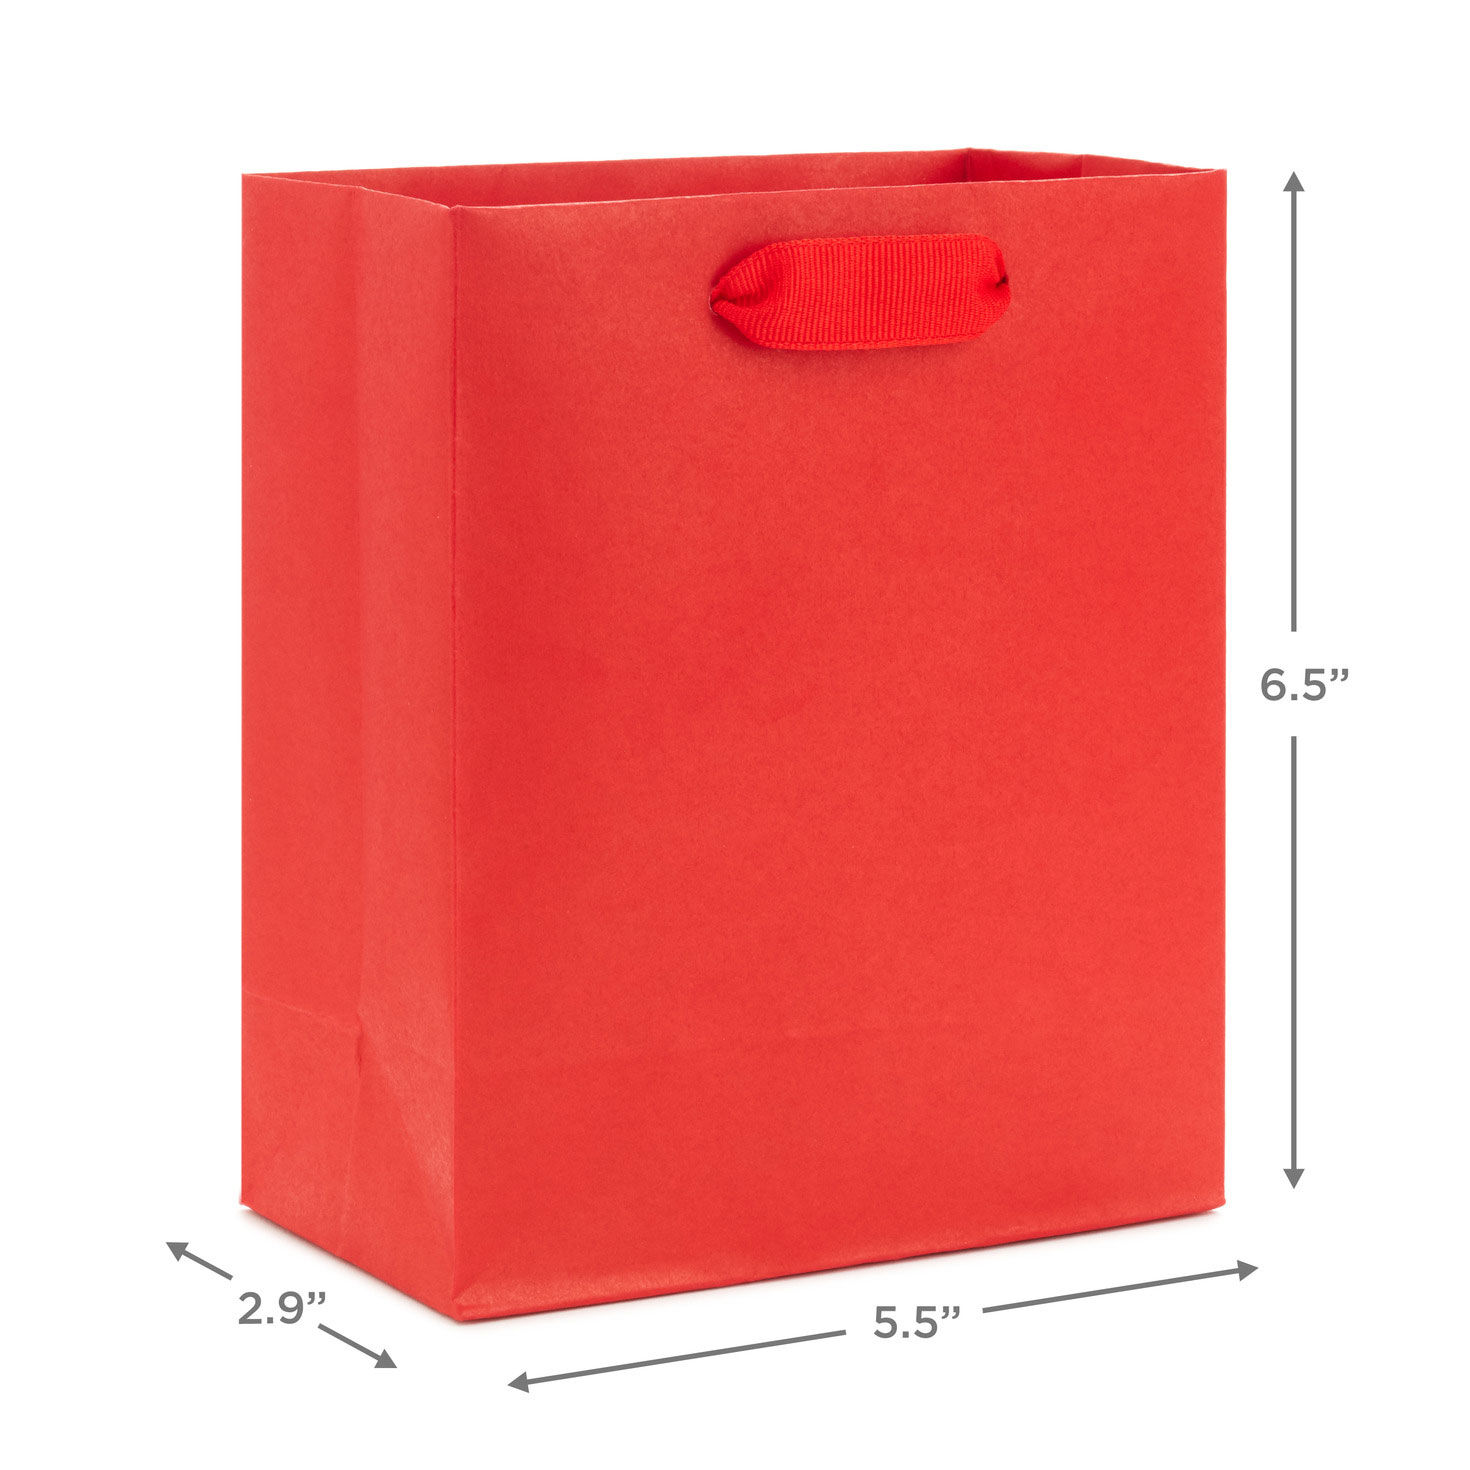 6.5" Red Small Gift Bag for only USD 2.49 | Hallmark